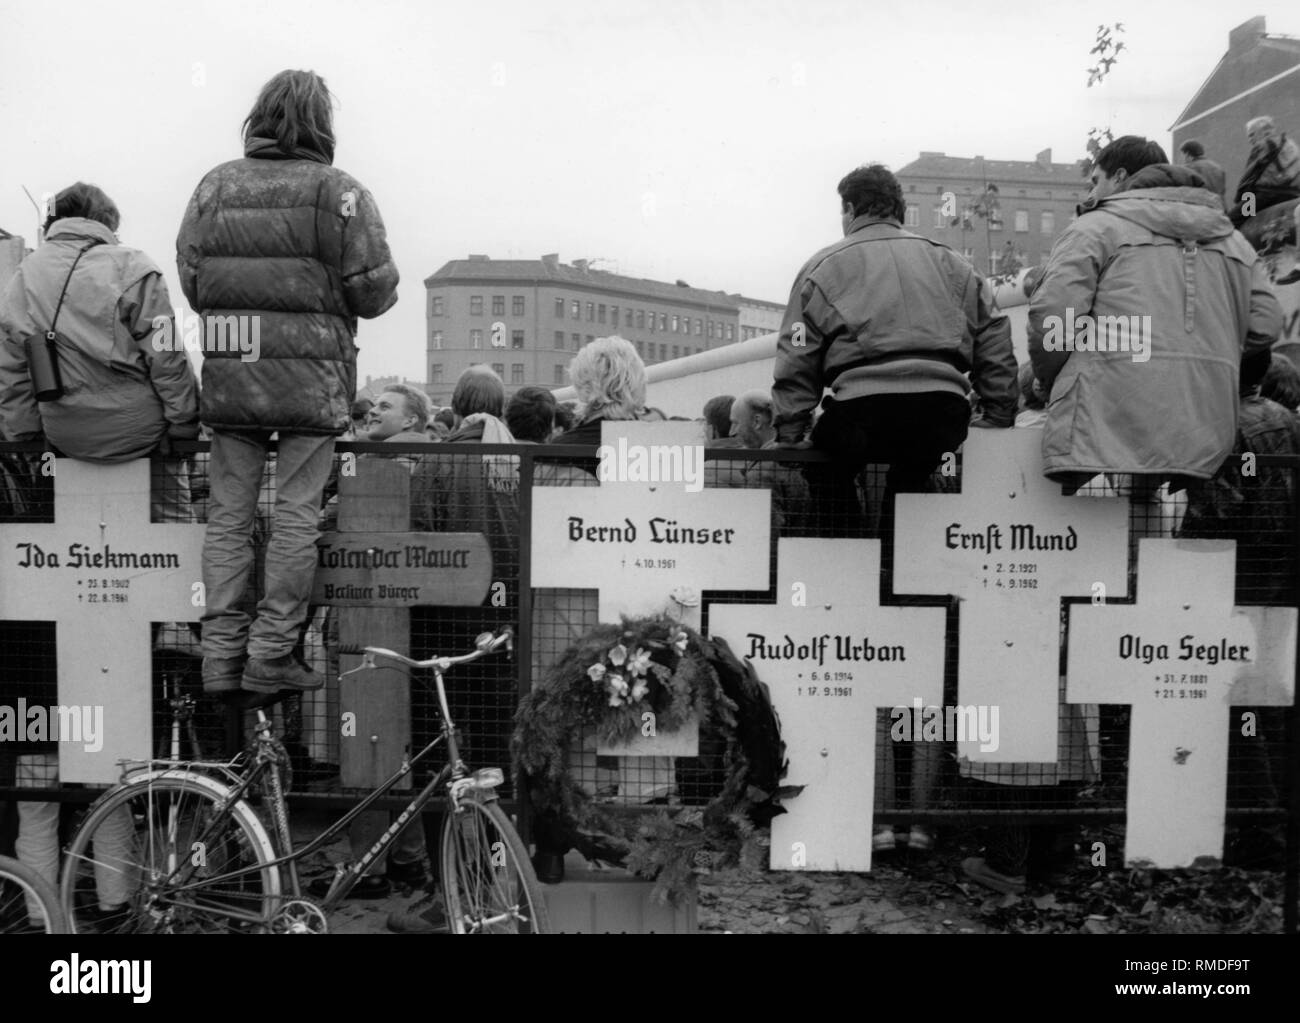 Crosses commemorating the victims of the Berlin Wall, 1989.  Behind, a gathering of people shortly after the fall of the Berlin Wall at the crossing in Bernauerstrasse. On the crosses are the following names: Ida Siekmann, Bernd Luenser, Rudolf Urban, Ernst Mund, Olga Segler. Stock Photo